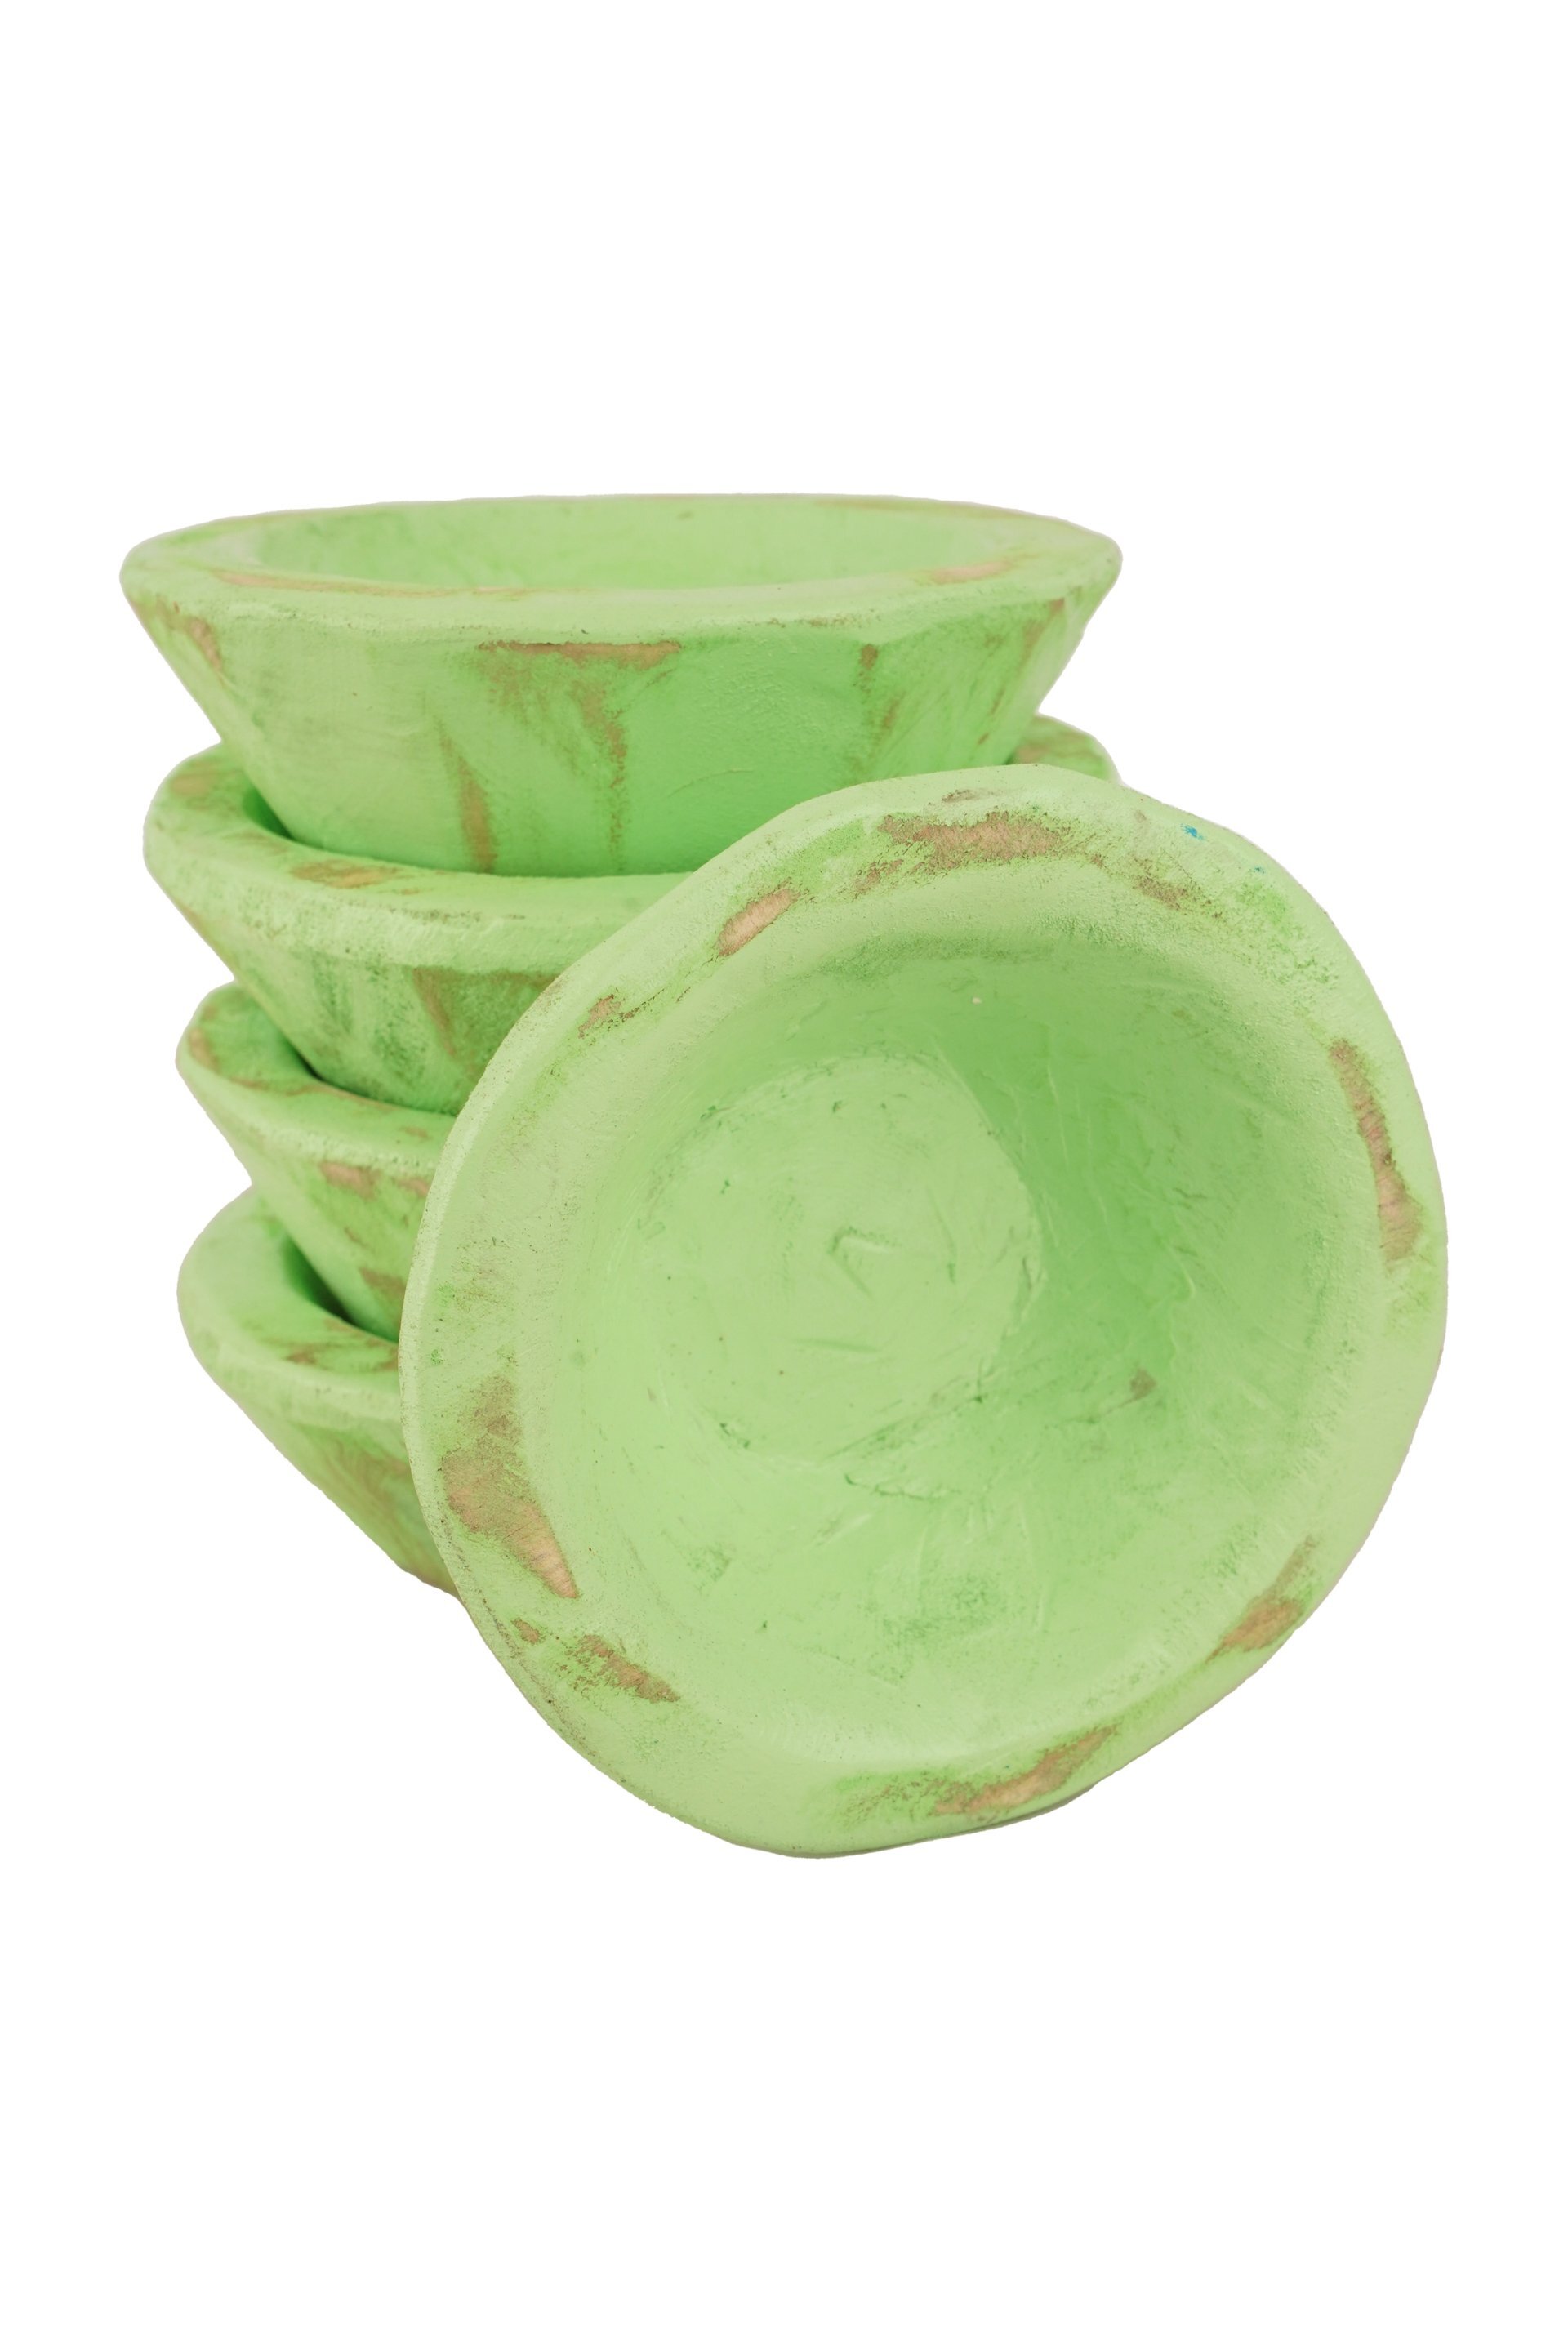 Stubby Round-Super Mini Dough Bowl-6 inch -Candle Ready-13 Color Choices